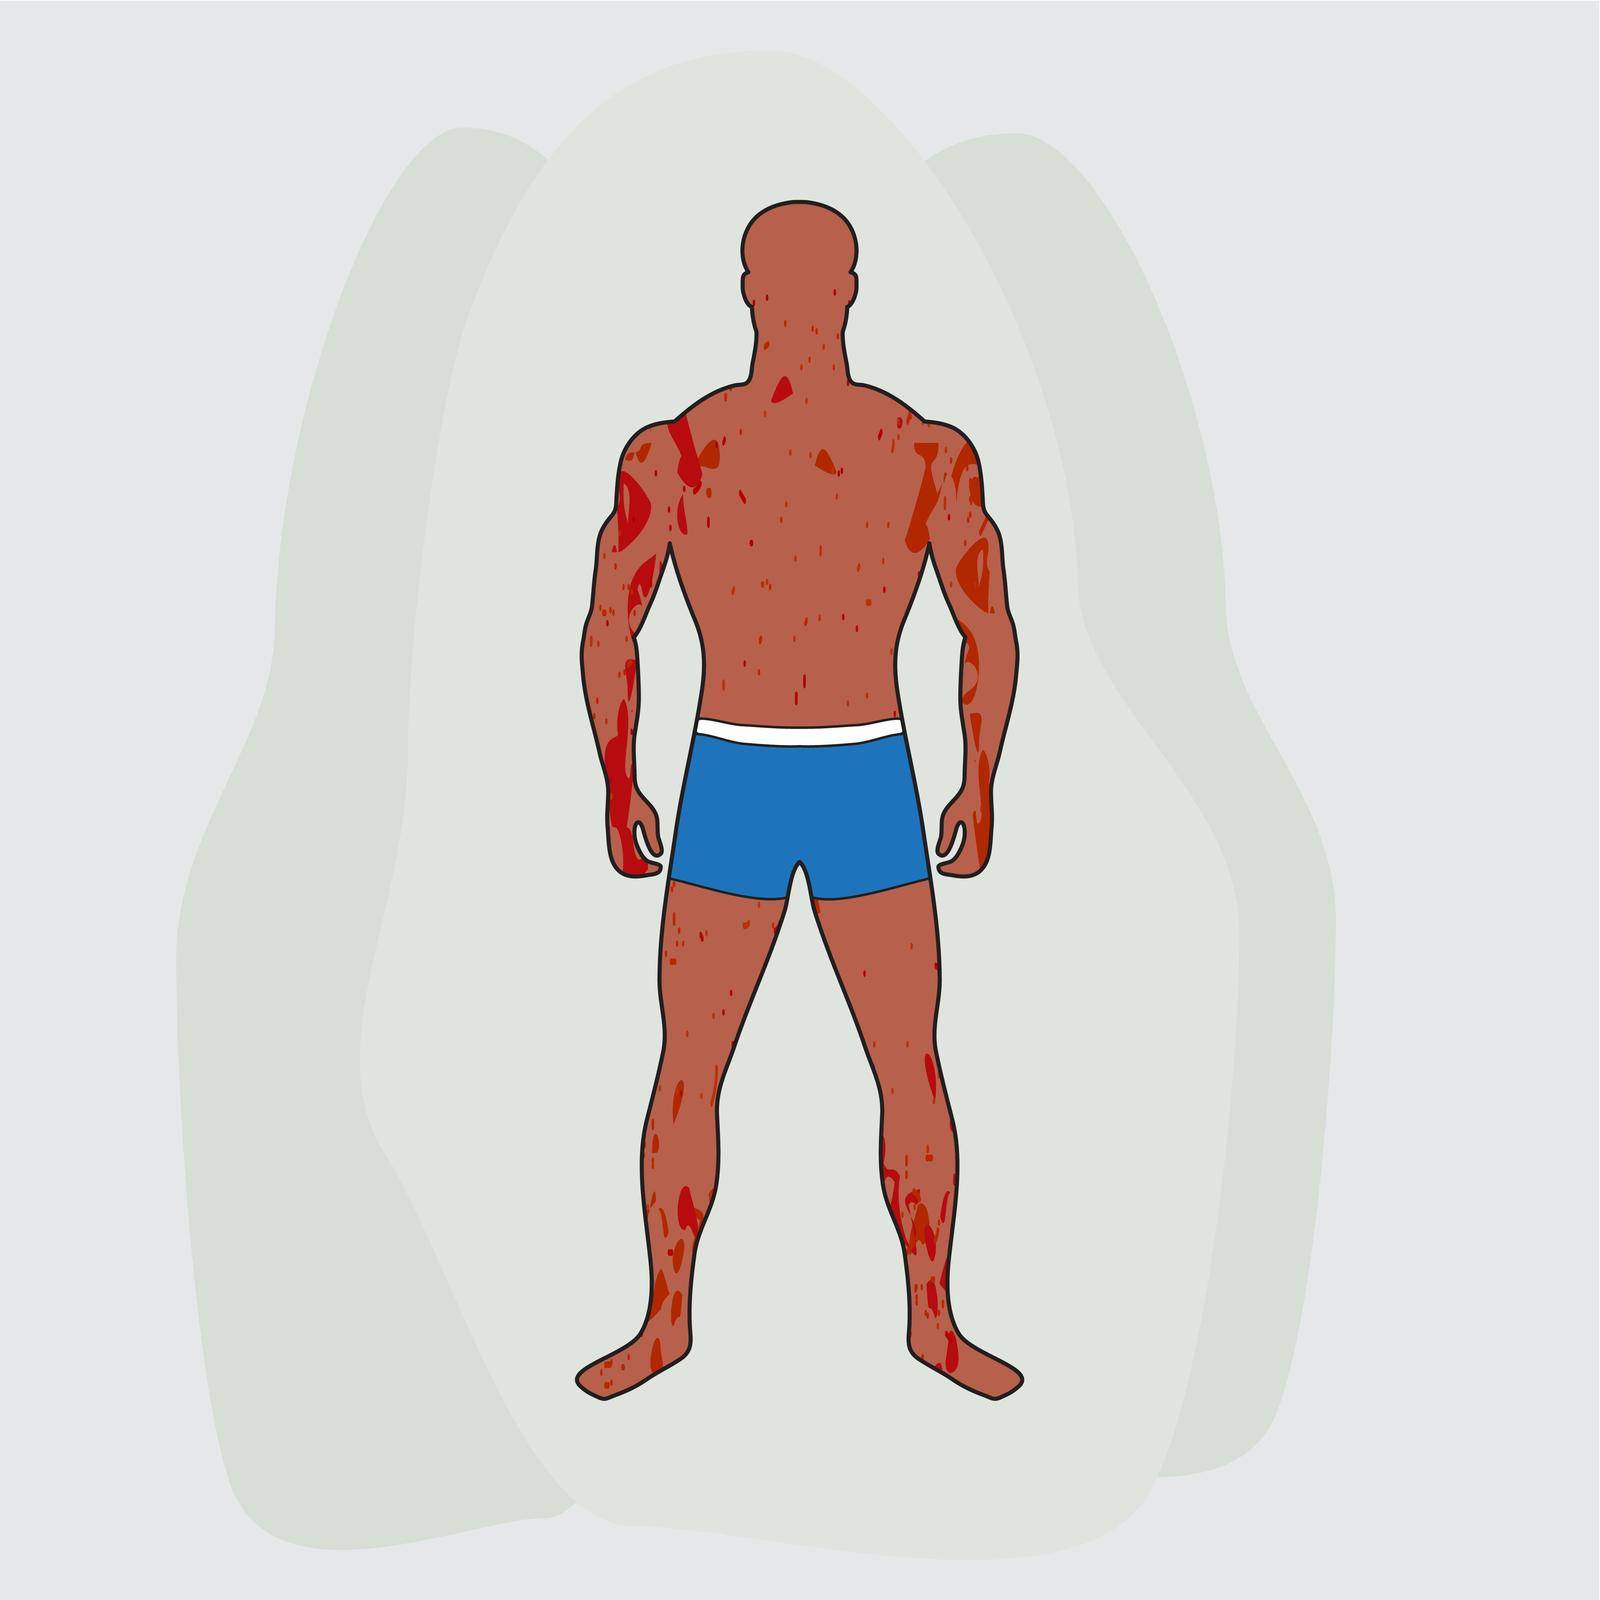 Painful skin condition in man in blue trunks by Infobond